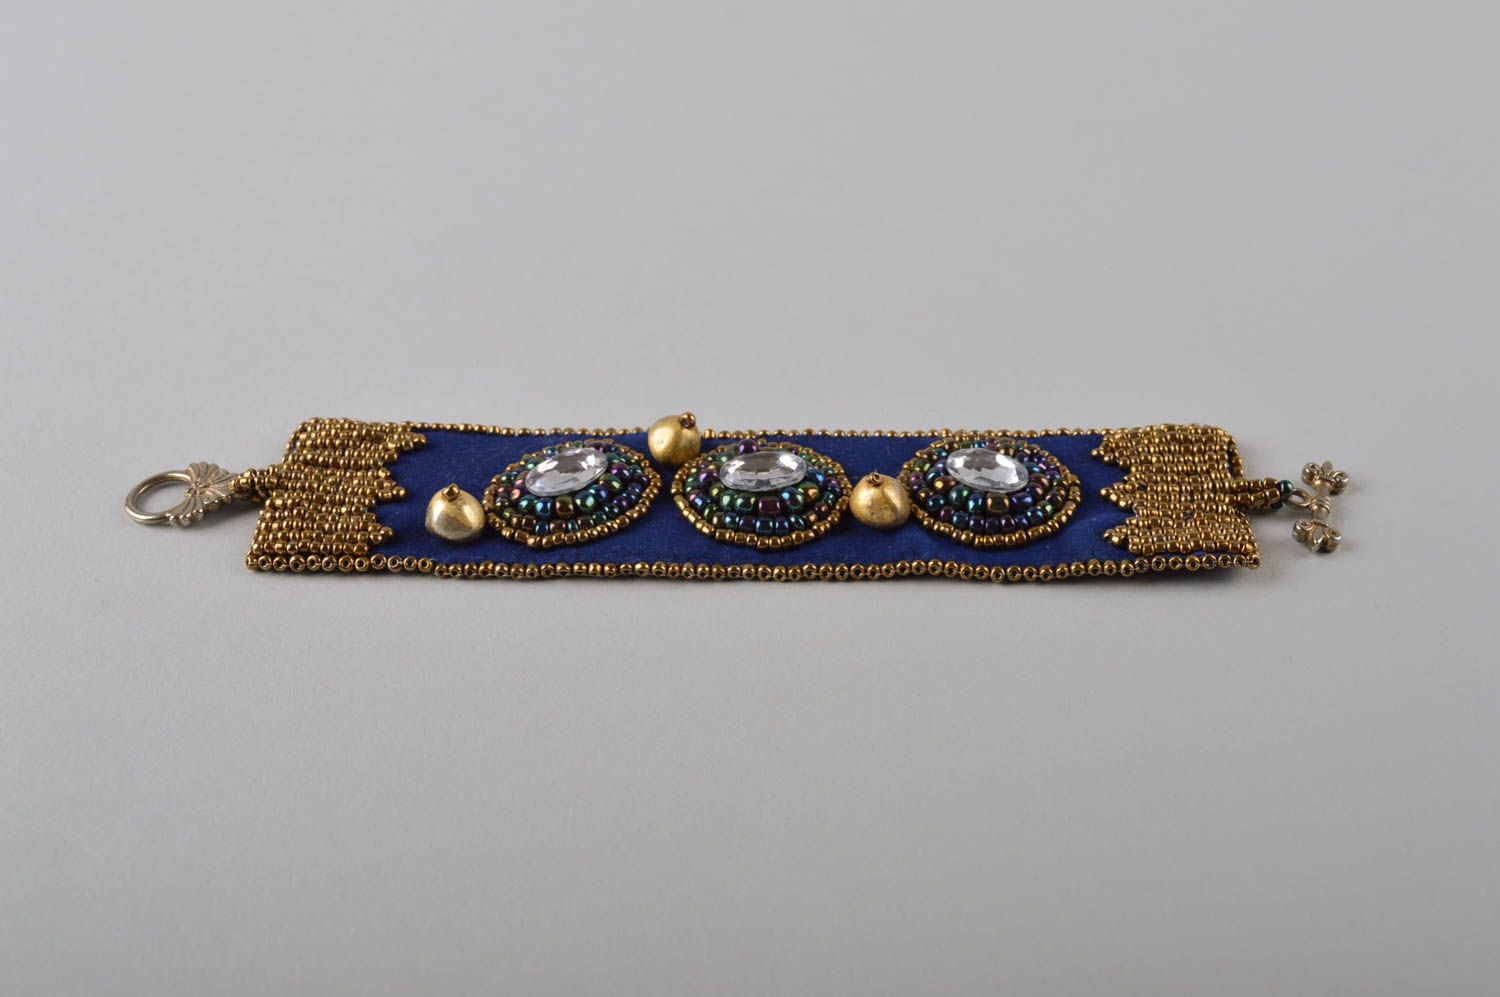 Handmade beaded dark blue bracelet with crystal charms and gold beads photo 5